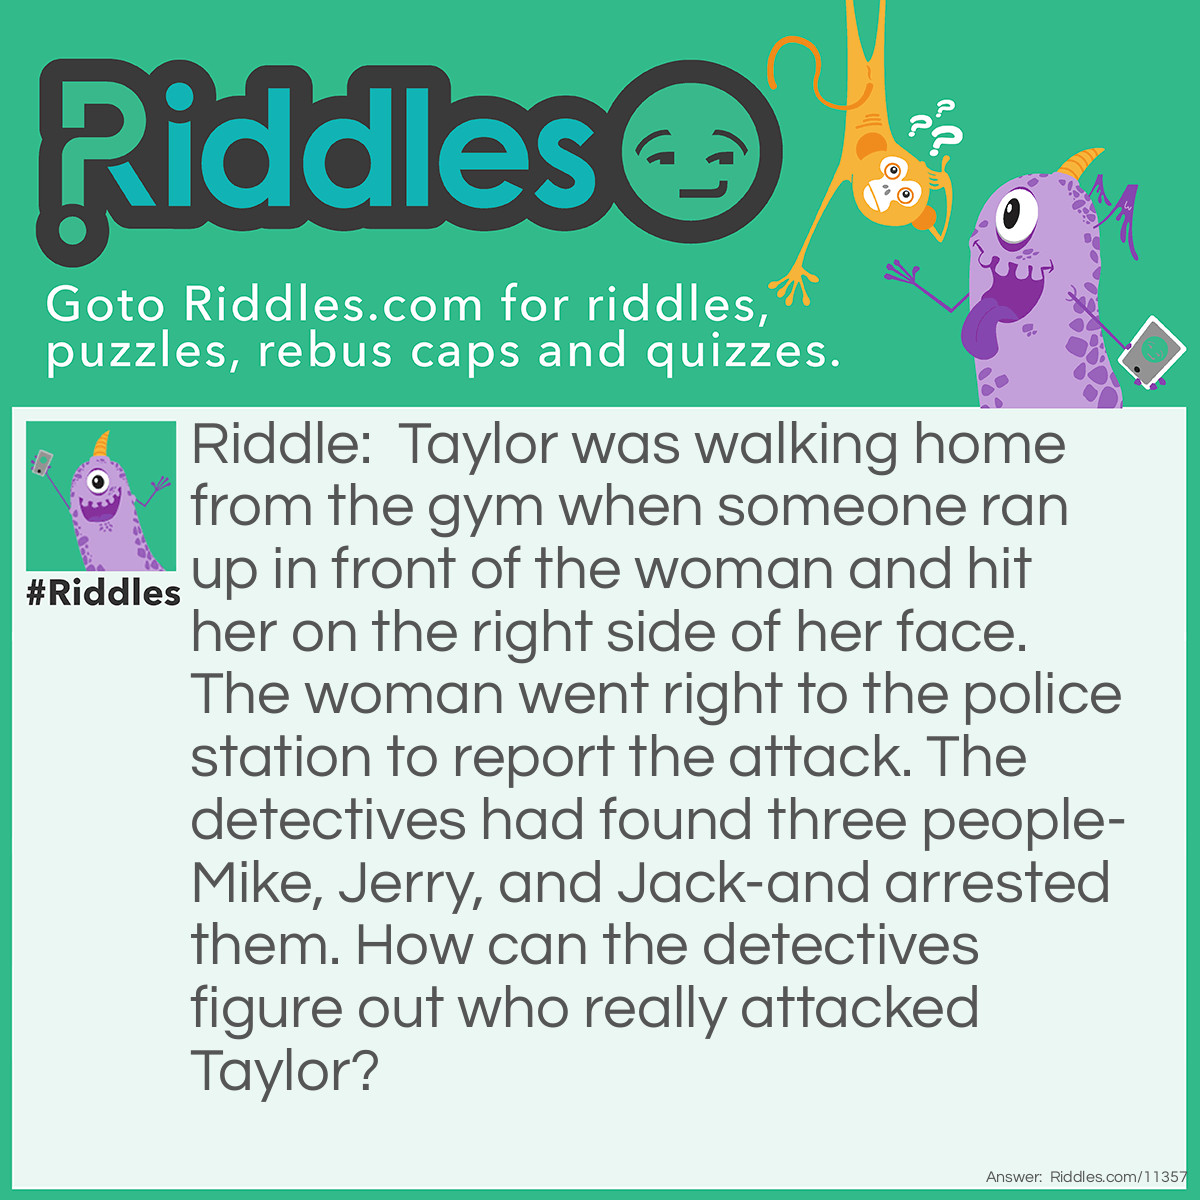 Riddle: Taylor was walking home from the gym when someone ran up in front of the woman and hit her on the right side of her face. The woman went right to the police station to report the attack. The detectives had found three people-Mike, Jerry, and Jack-and arrested them. How can the detectives figure out who really attacked Taylor? Answer: The detectives should give each suspect a marker and ask them to write their names on a whiteboard. Taylor was hit on the right side of her face, which means that the person who attacked her is left-handed. The detectives just need to observe which of the three suspects writes with his left hand, and that person should be arrested.